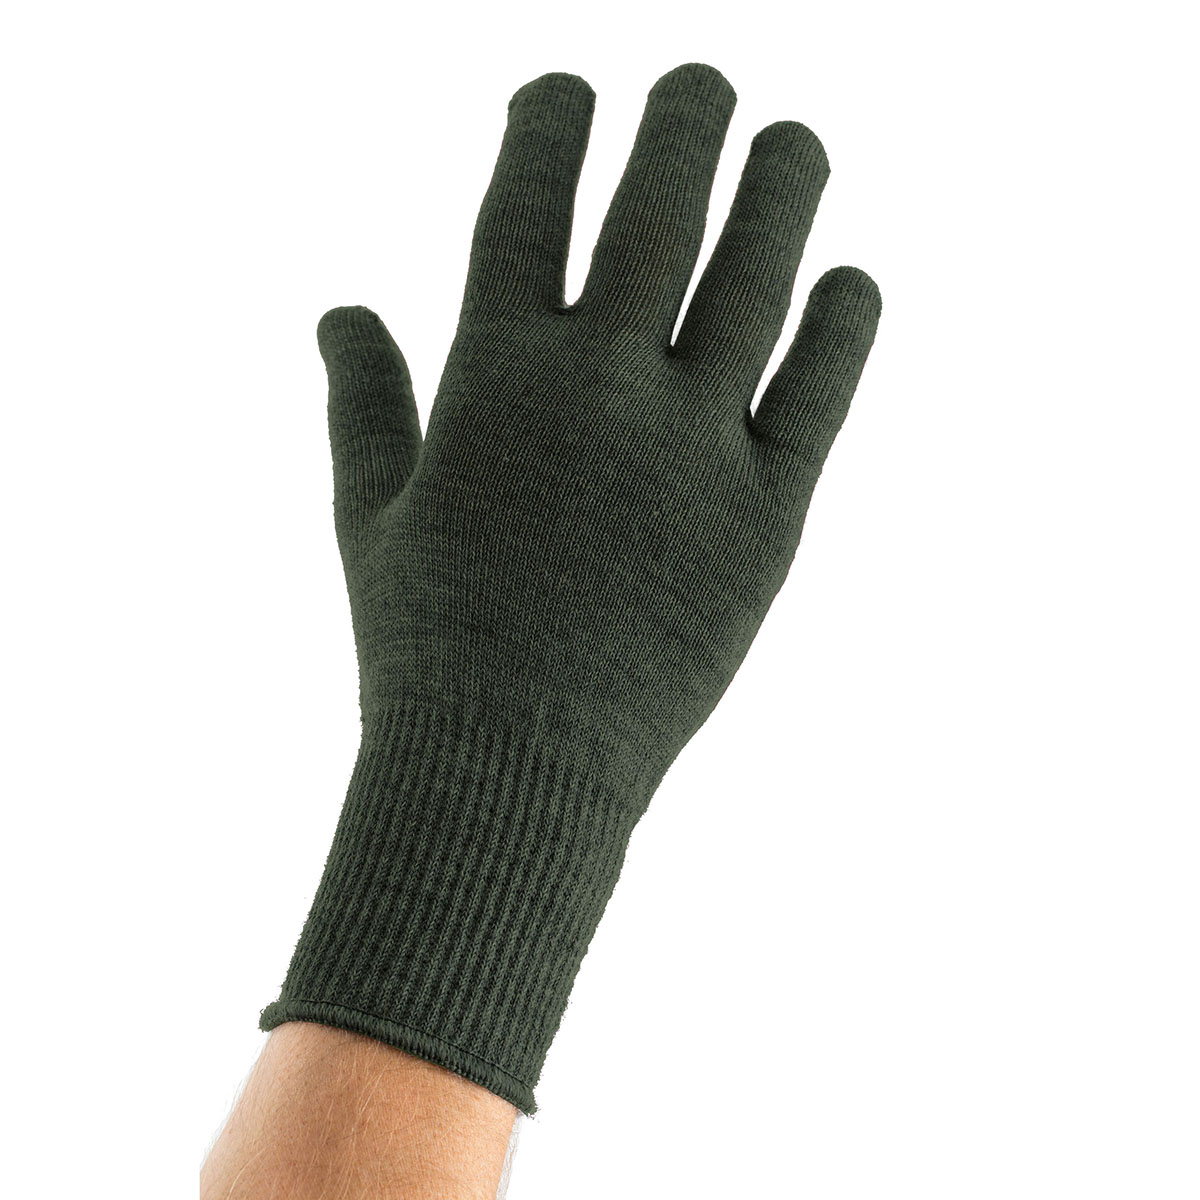 L/XL Olive Green Fleece Gloves also wear as liners EDZ Light Thermal Gloves 